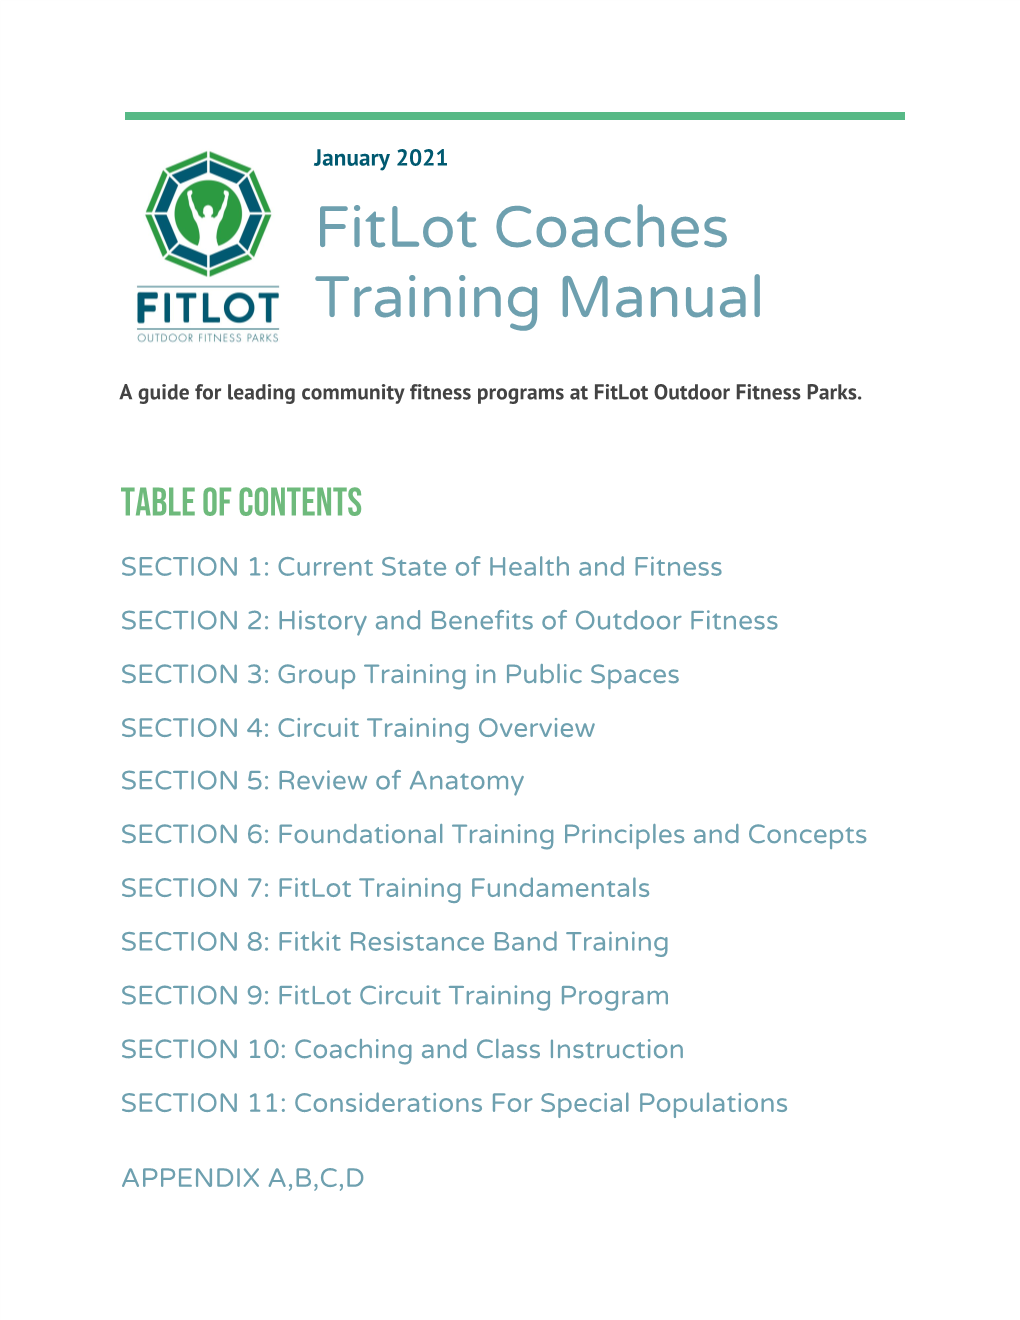 Fitlot Coaches Training Manual